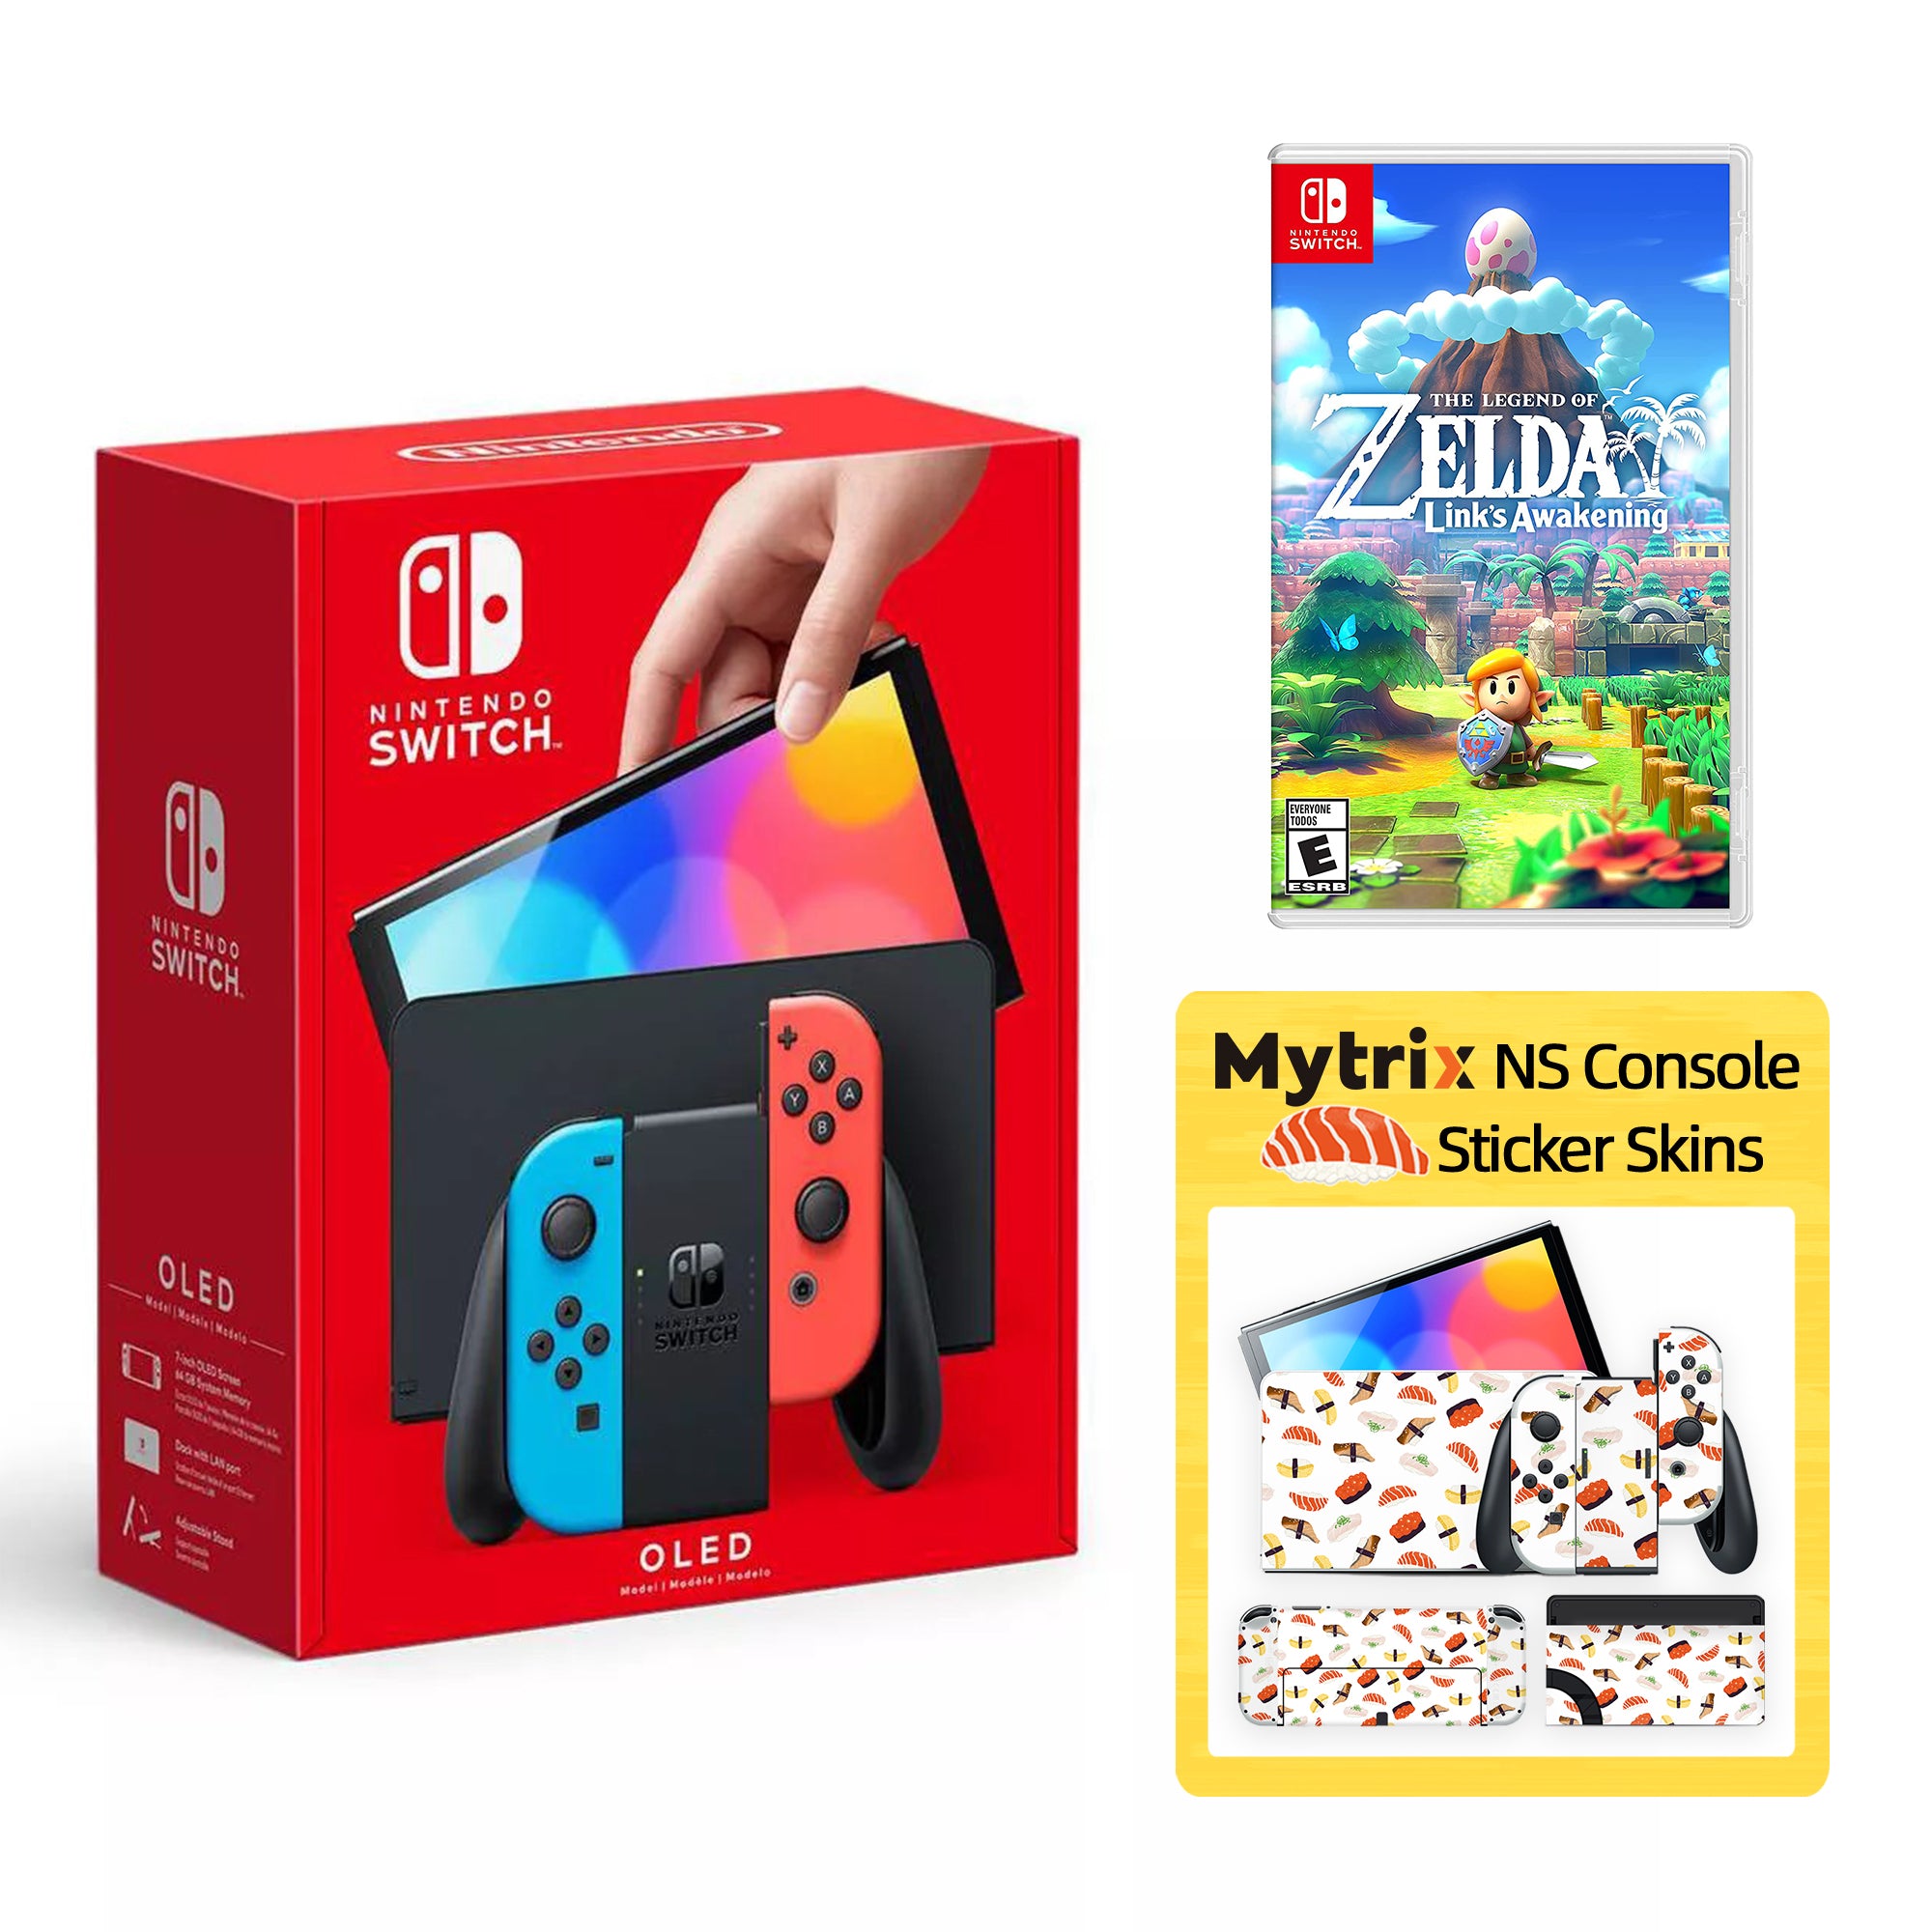 2022 New Nintendo Switch OLED Model Neon Red Blue with Legend of Zelda Link's Awakening and Mytrix Full Body Skin Sticker for NS OLED Console, Dock and Joycons - Sushi Set